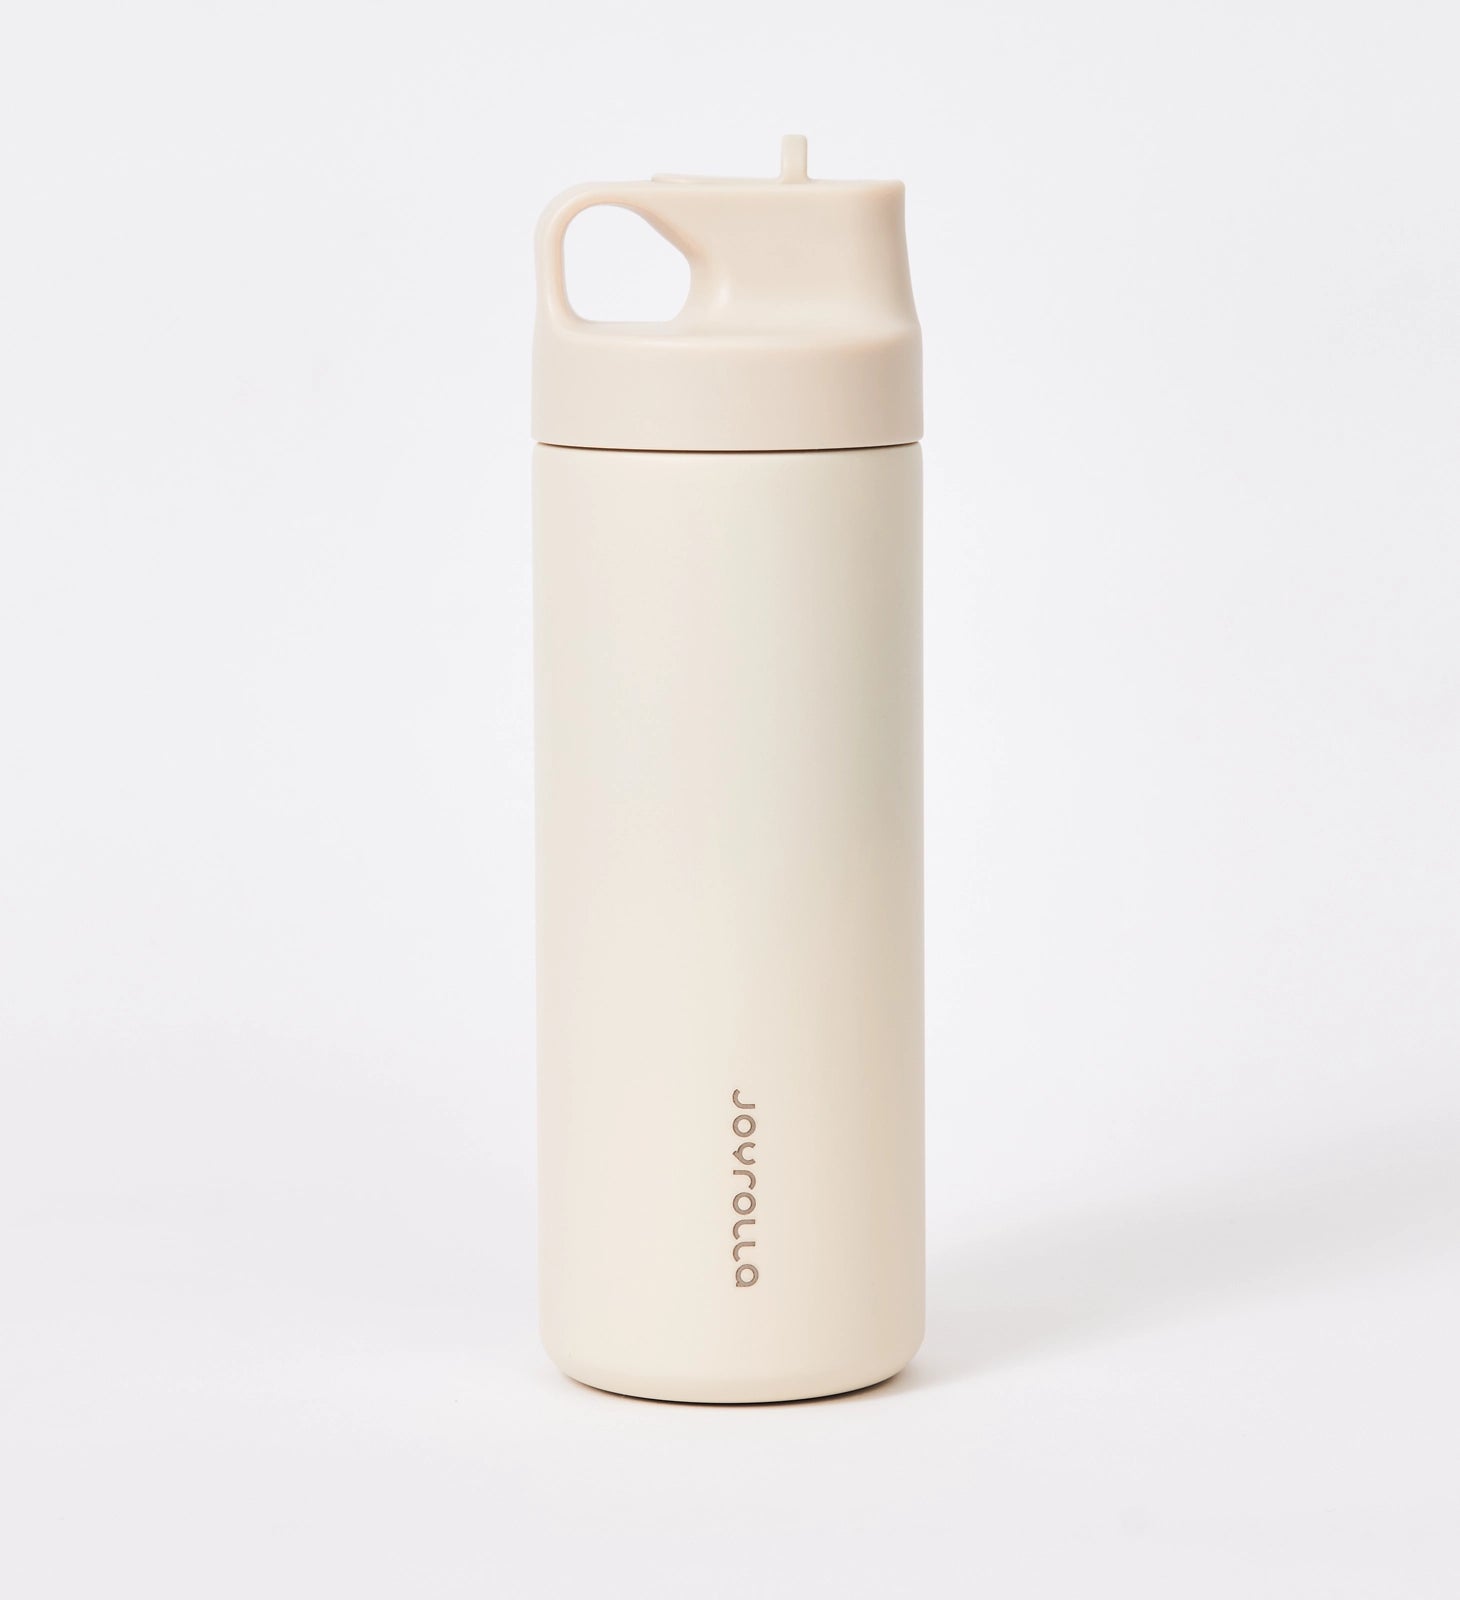 "Alt text: A reusable drink bottle in a bone color, featuring a sleek and eco-friendly design. The bottle is made from durable and BPA-free materials, ensuring safe and sustainable hydration. Its bone color gives it a clean and minimalist appearance. The bottle is designed to be reusable, reducing single-use plastic waste. It is equipped with a secure cap or lid for leak-proof functionality, making it a convenient choice for carrying beverages on the go